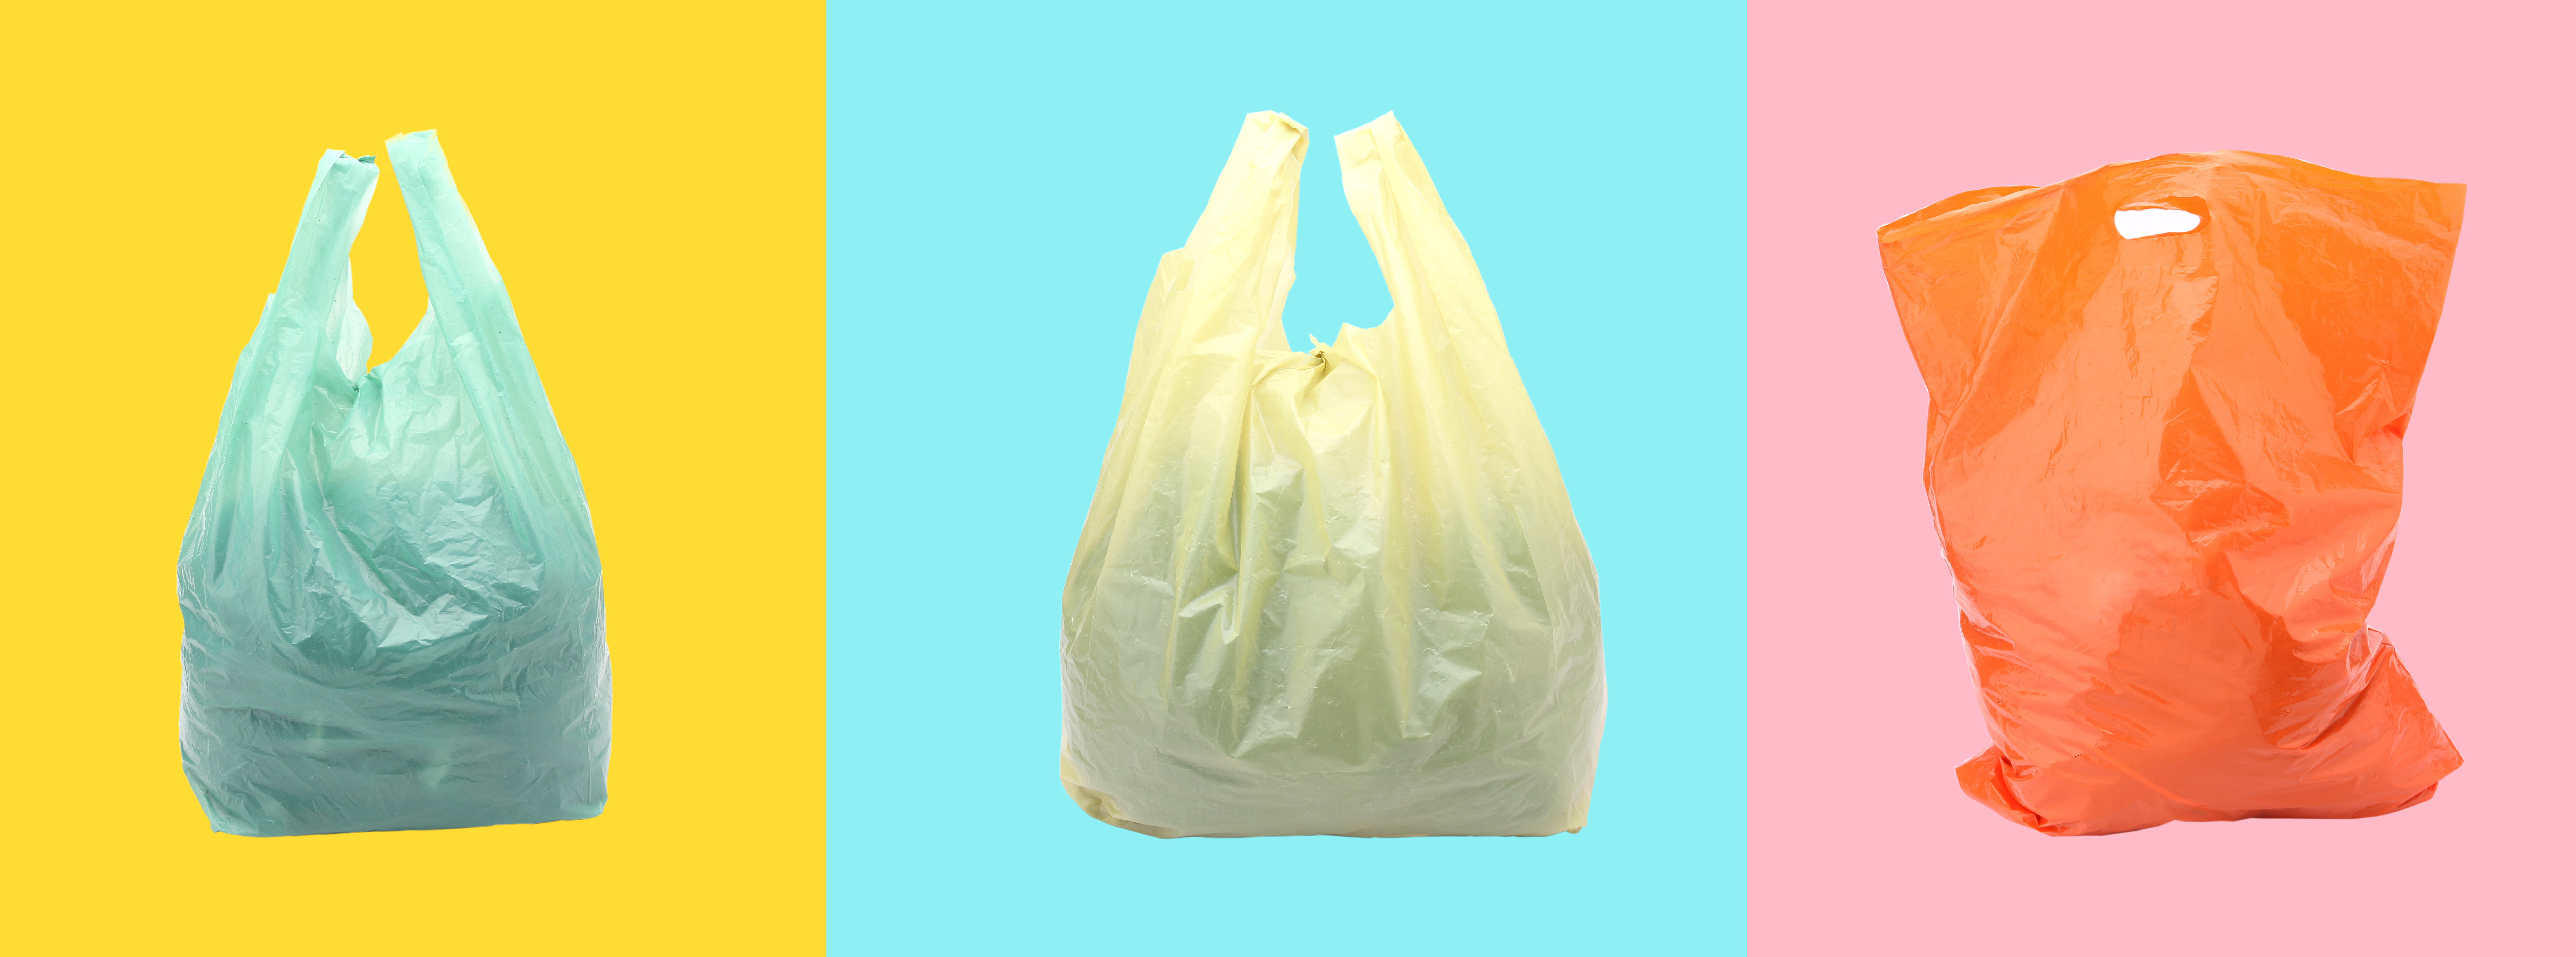 Image of plastic shopping bags